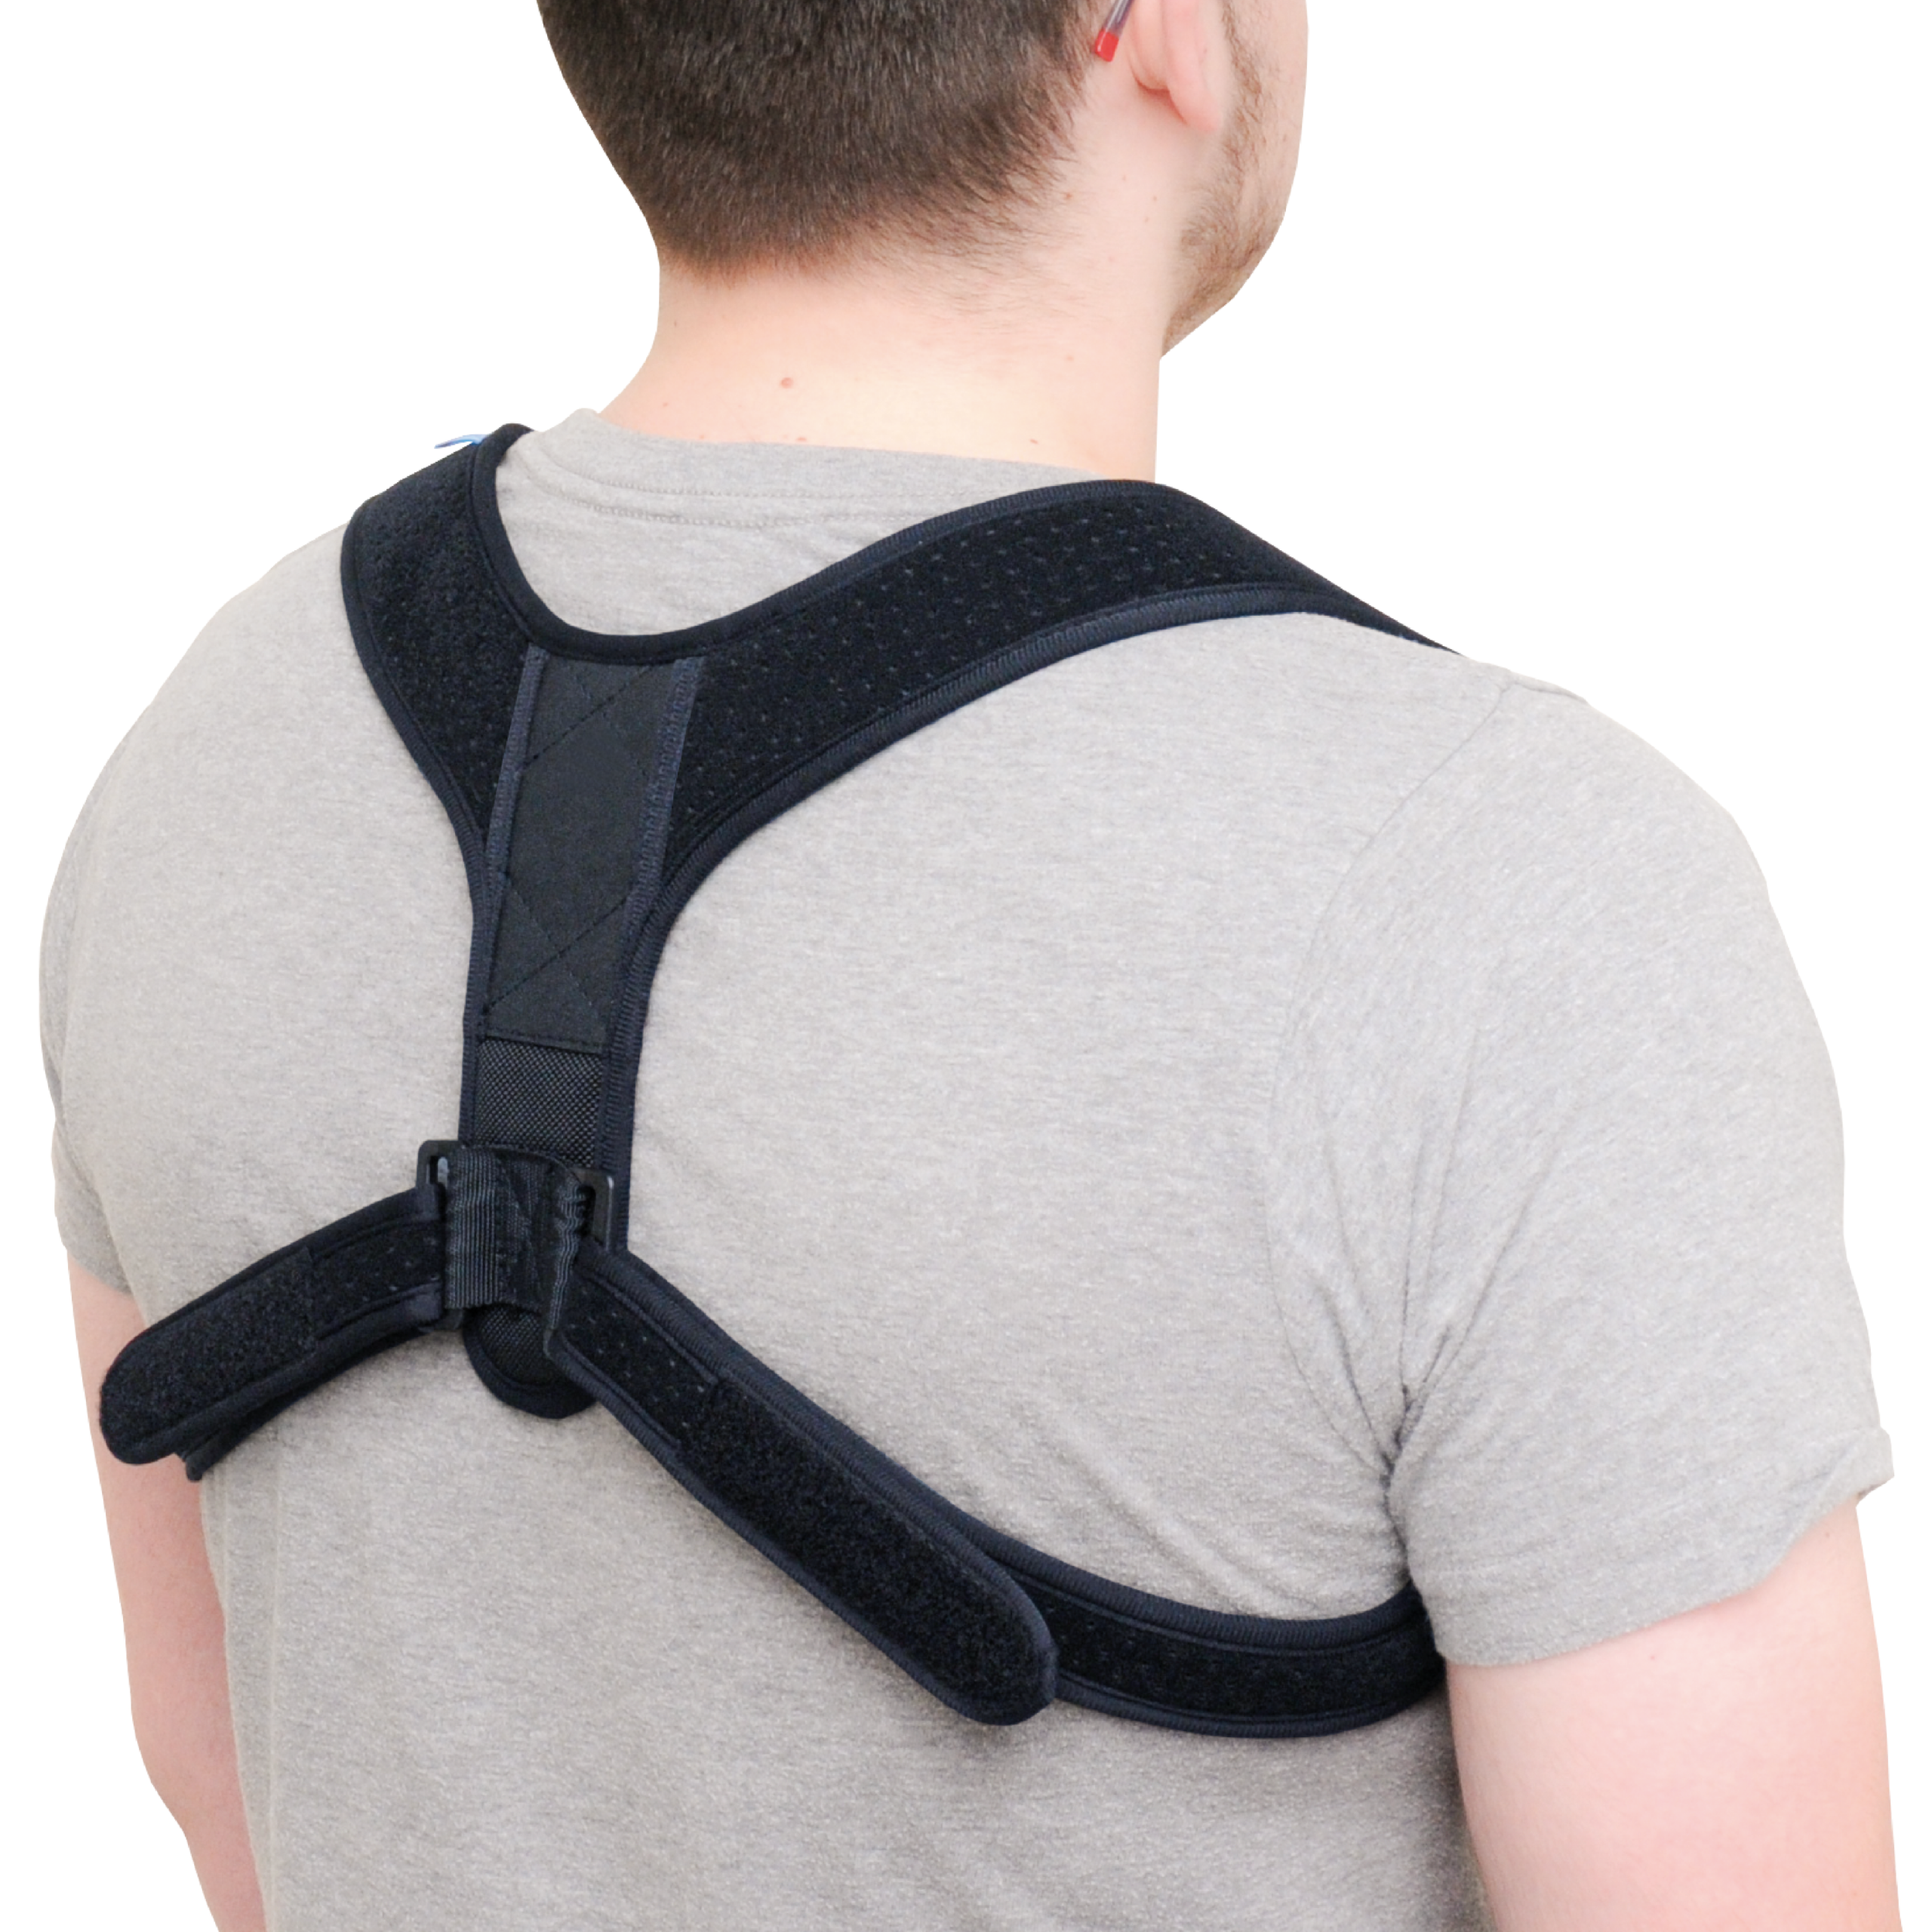 Low Profile Posture Support, One Size Fits Most, Orthotix